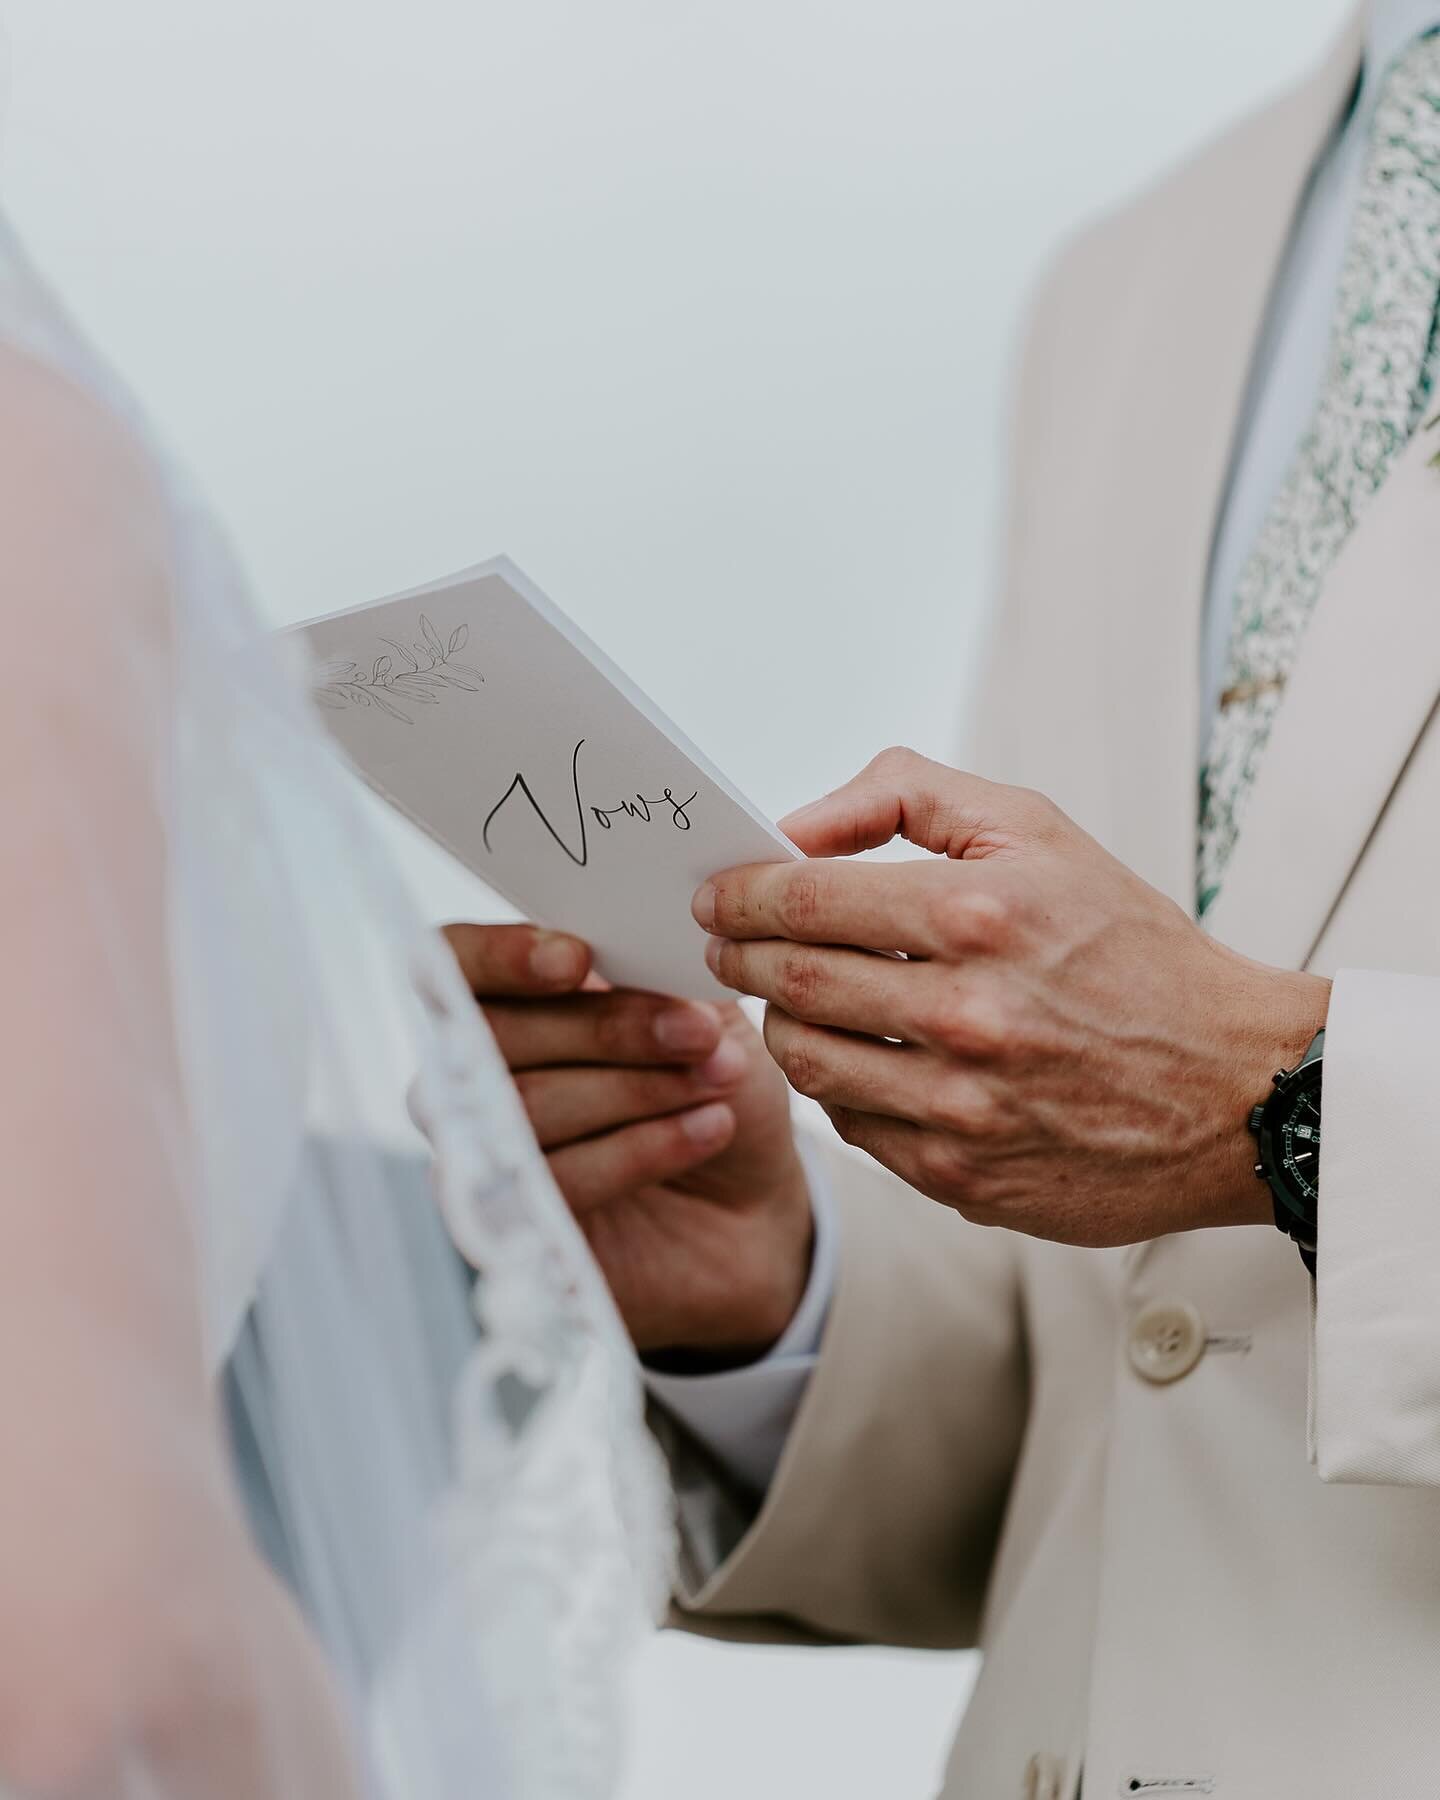 Personal vows will never go out of style. 

We have personally seen our couples be split 50/50 on whether to read their vows privately or during the ceremony. Both have their list of pros and cons, but whether you ready your vows alone or in front of